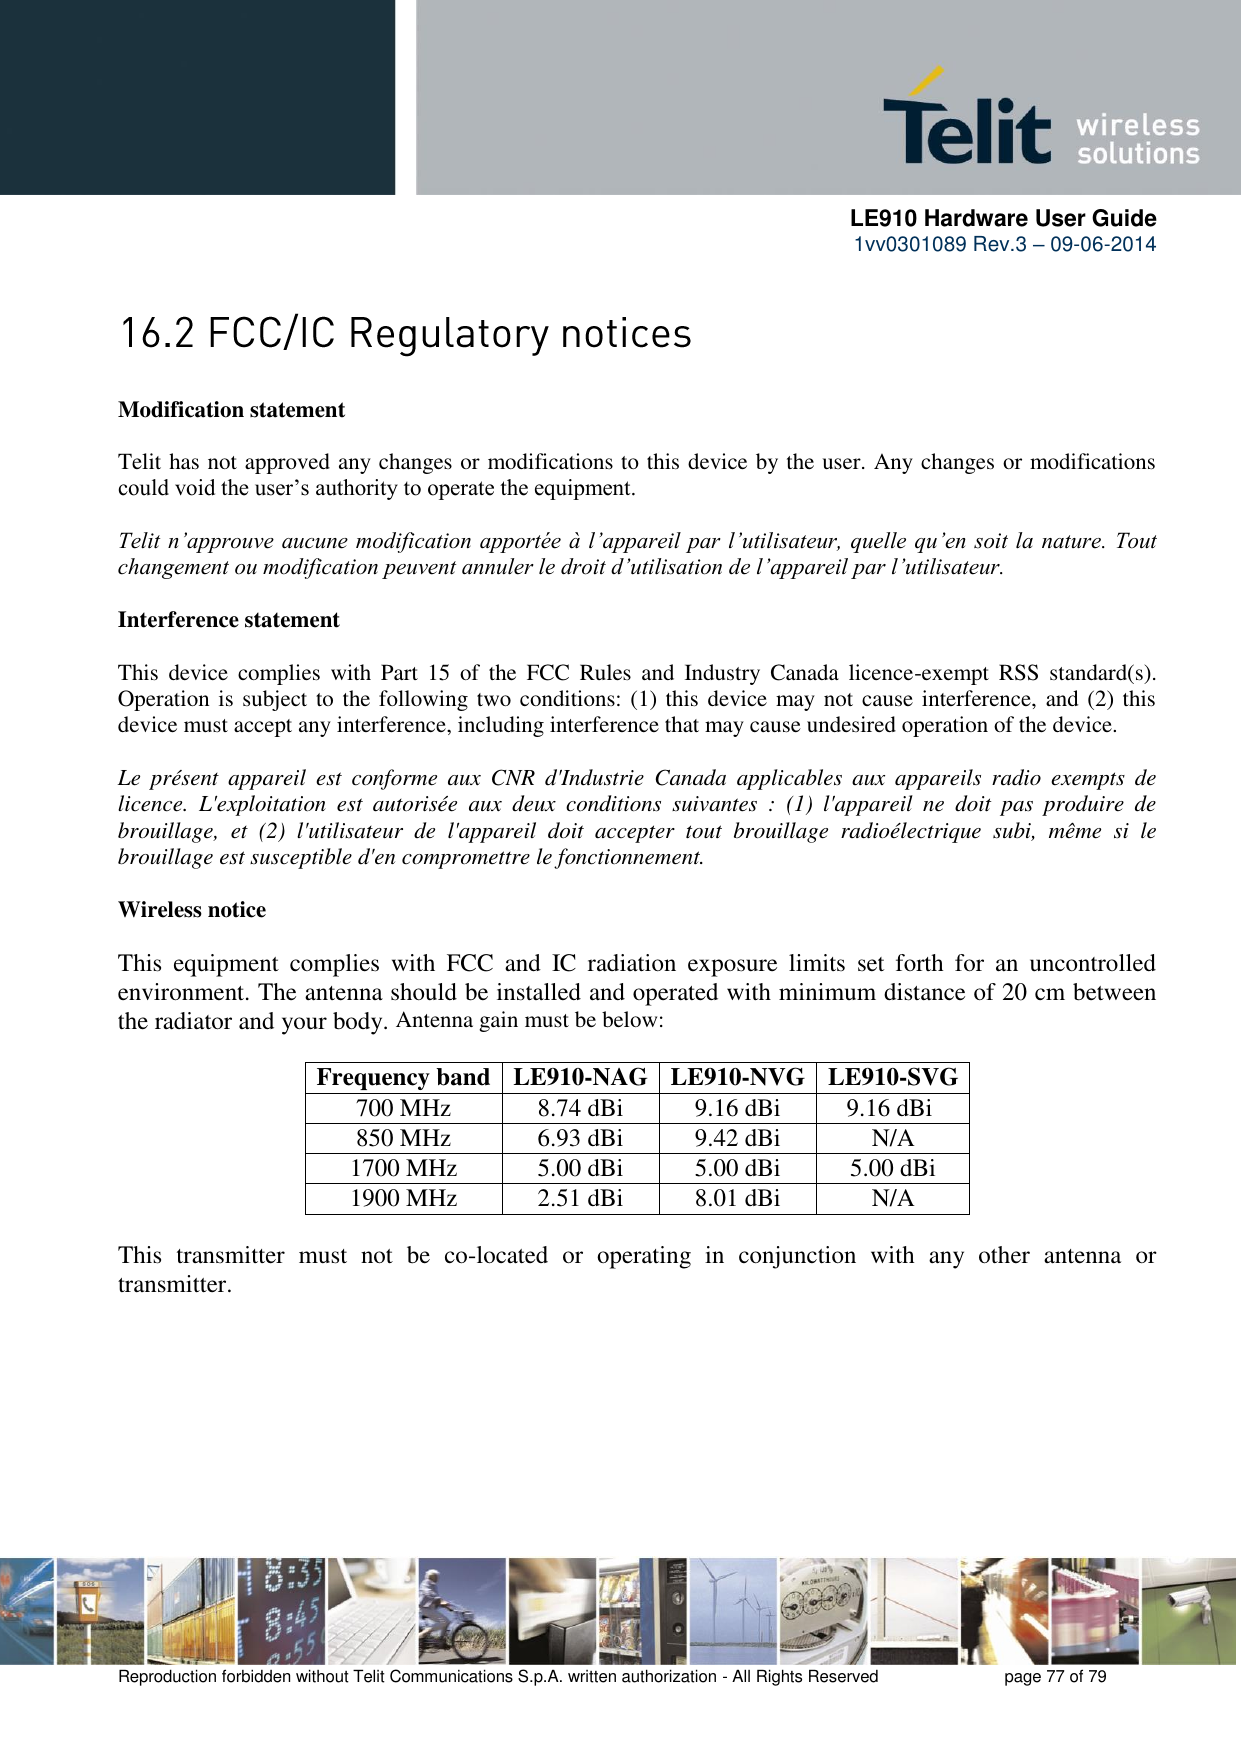      LE910 Hardware User Guide 1vv0301089 Rev.3 – 09-06-2014    Reproduction forbidden without Telit Communications S.p.A. written authorization - All Rights Reserved    page 77 of 79   Modification statement  Telit has not approved any changes or modifications to this device by the user. Any changes or modifications could void the user’s authority to operate the equipment.  Telit n’approuve aucune modification apportée à l’appareil par l’utilisateur, quelle qu’en soit la nature. Tout changement ou modification peuvent annuler le droit d’utilisation de l’appareil par l’utilisateur.  Interference statement  This  device  complies  with  Part  15  of  the  FCC  Rules  and  Industry  Canada  licence-exempt  RSS  standard(s). Operation is subject to the following two conditions: (1) this device may not cause interference, and (2) this device must accept any interference, including interference that may cause undesired operation of the device.  Le  présent  appareil  est  conforme  aux  CNR  d&apos;Industrie  Canada  applicables  aux  appareils  radio  exempts  de licence.  L&apos;exploitation  est  autorisée  aux  deux  conditions  suivantes  :  (1)  l&apos;appareil  ne  doit  pas  produire  de brouillage,  et  (2)  l&apos;utilisateur  de  l&apos;appareil  doit  accepter  tout  brouillage  radioélectrique  subi,  même  si  le brouillage est susceptible d&apos;en compromettre le fonctionnement.  Wireless notice  This  equipment  complies  with  FCC  and  IC  radiation  exposure  limits  set  forth  for  an  uncontrolled environment. The antenna should be installed and operated with minimum distance of 20 cm between the radiator and your body. Antenna gain must be below:  Frequency band LE910-NAG LE910-NVG LE910-SVG 700 MHz 8.74 dBi 9.16 dBi  850 MHz 6.93 dBi 9.42 dBi N/A 1700 MHz 5.00 dBi 5.00 dBi 5.00 dBi 1900 MHz 2.51 dBi 8.01 dBi N/A  This  transmitter  must  not  be  co-located  or  operating  in  conjunction  with  any  other  antenna  or transmitter.  9.16 dBi